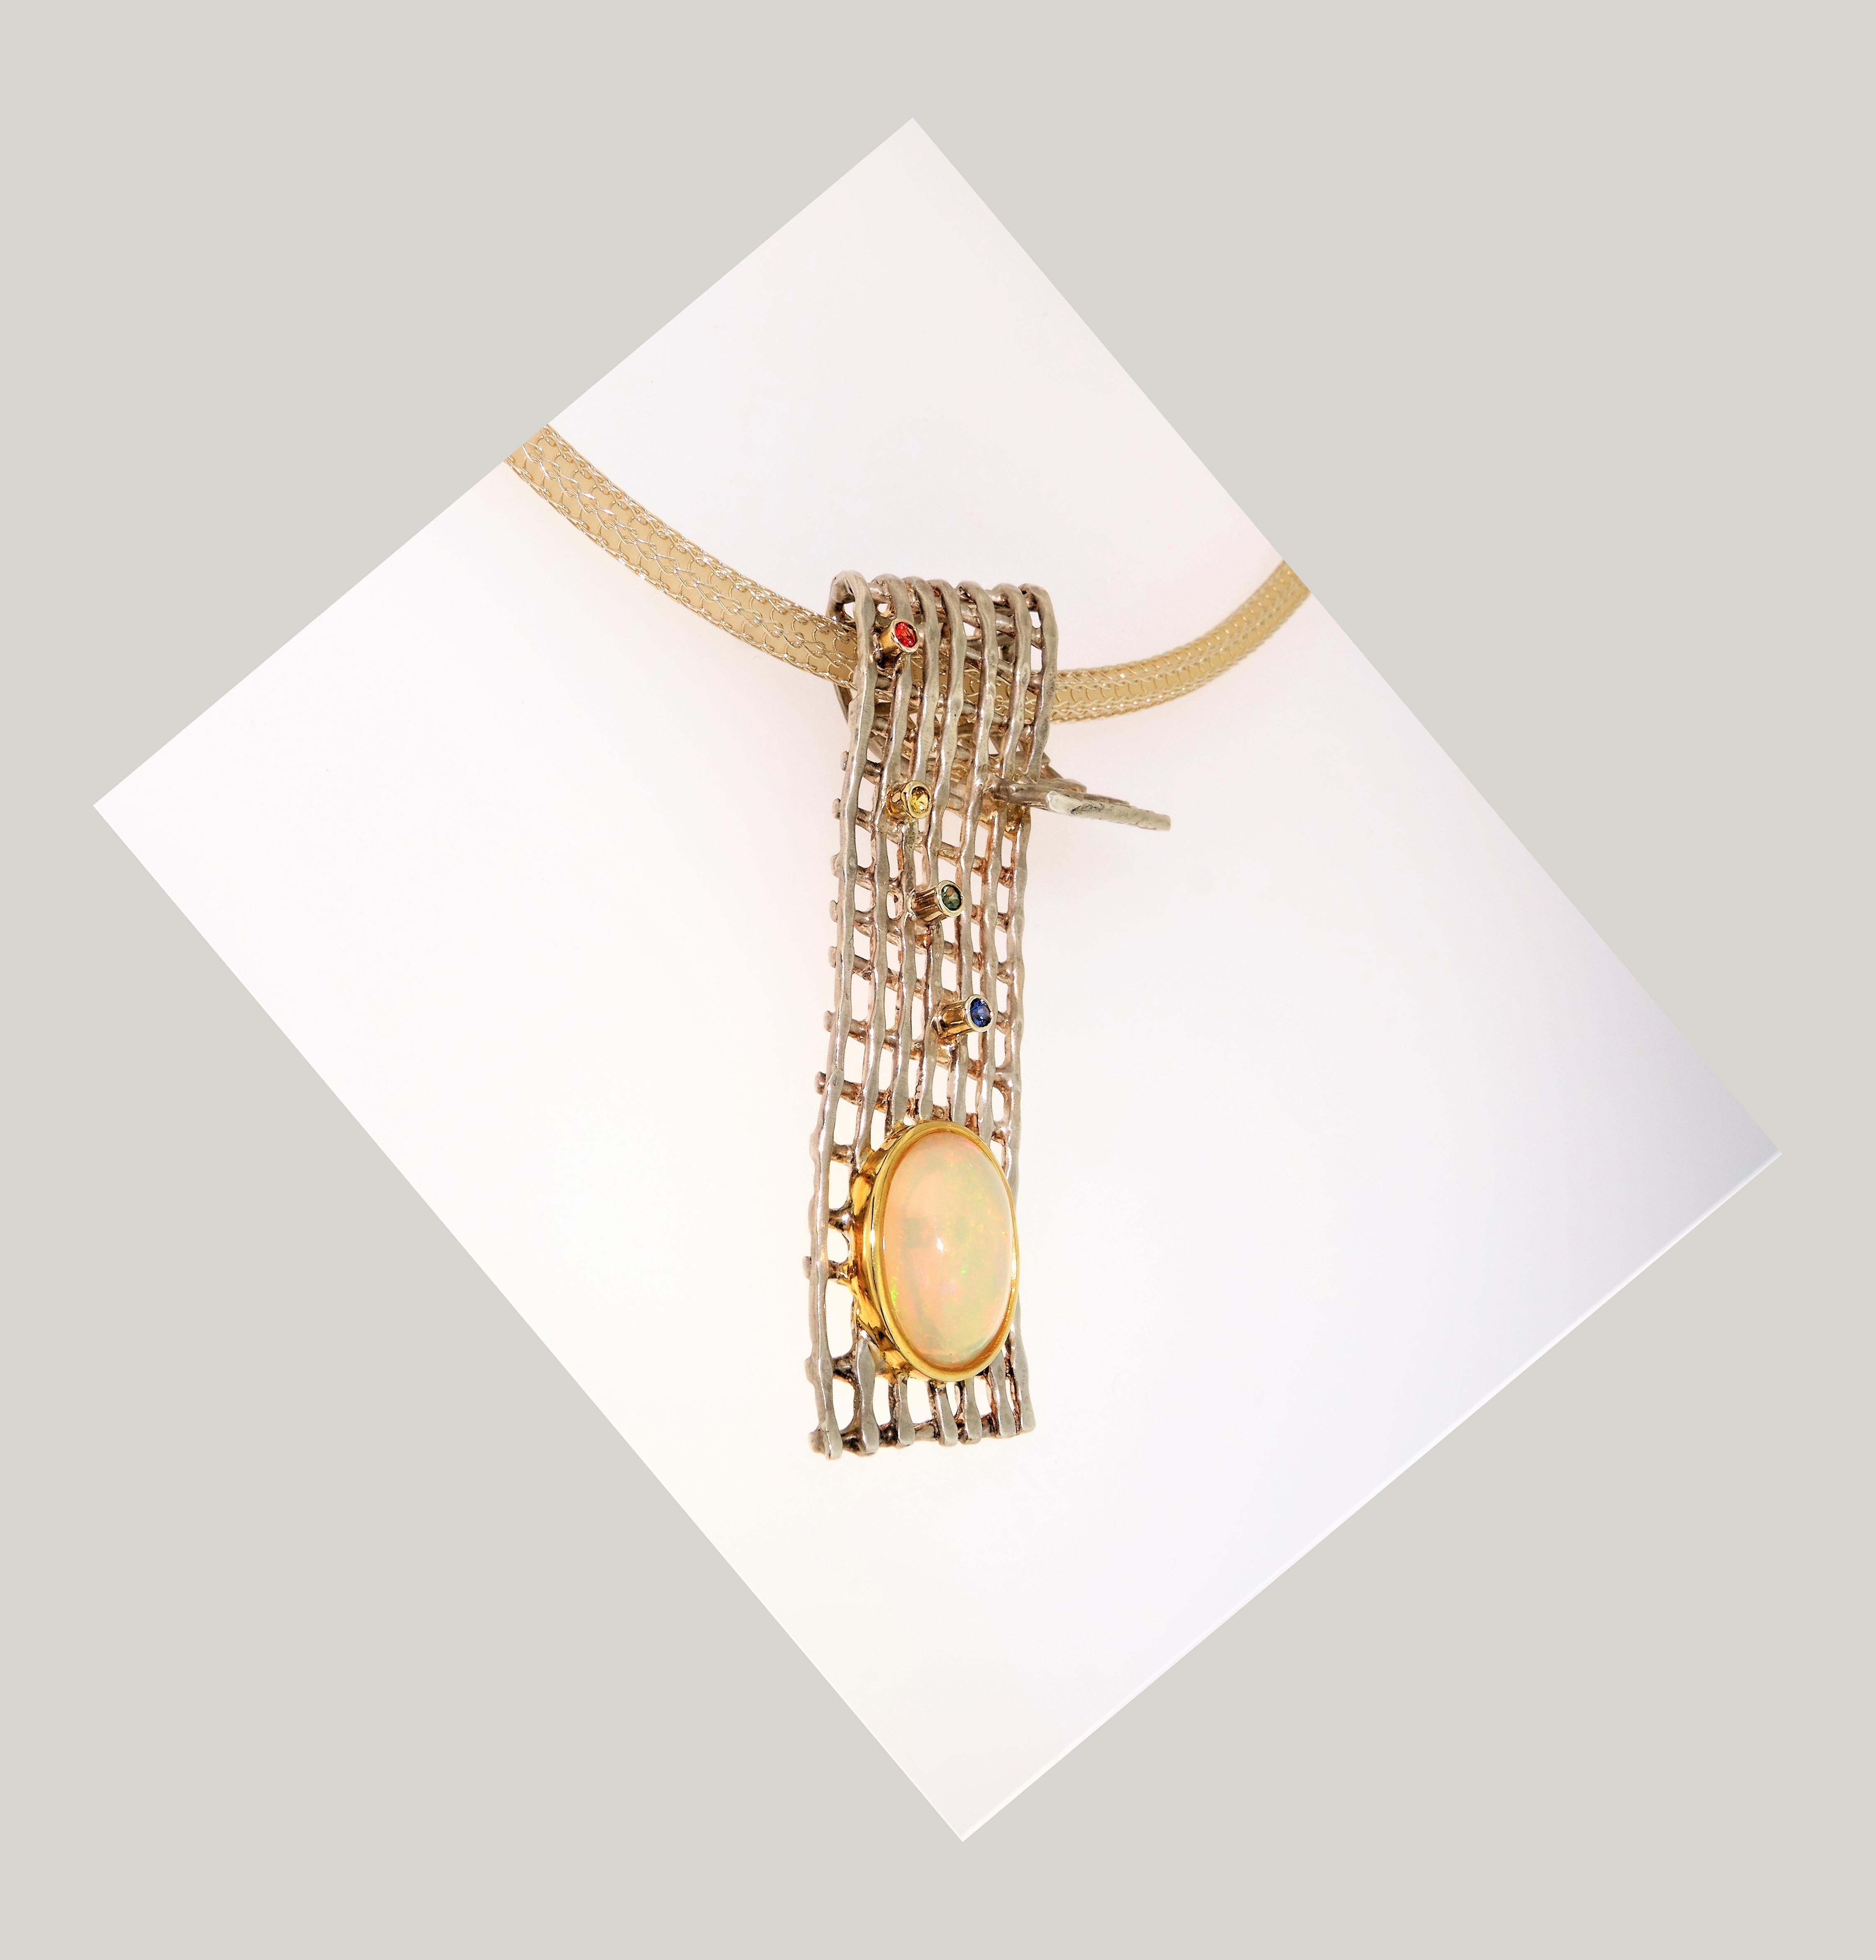 Stylish and finely detailed Ethiopian Opal and Gemstone Sapphire Pendant Necklace in flattering Lattice rectangular form; Opal Stone Weighs approx. 3.65 Carat; approx. stone size: 14 x 11mm; Diamond cut Round Sapphire stone weights approx. 0.13